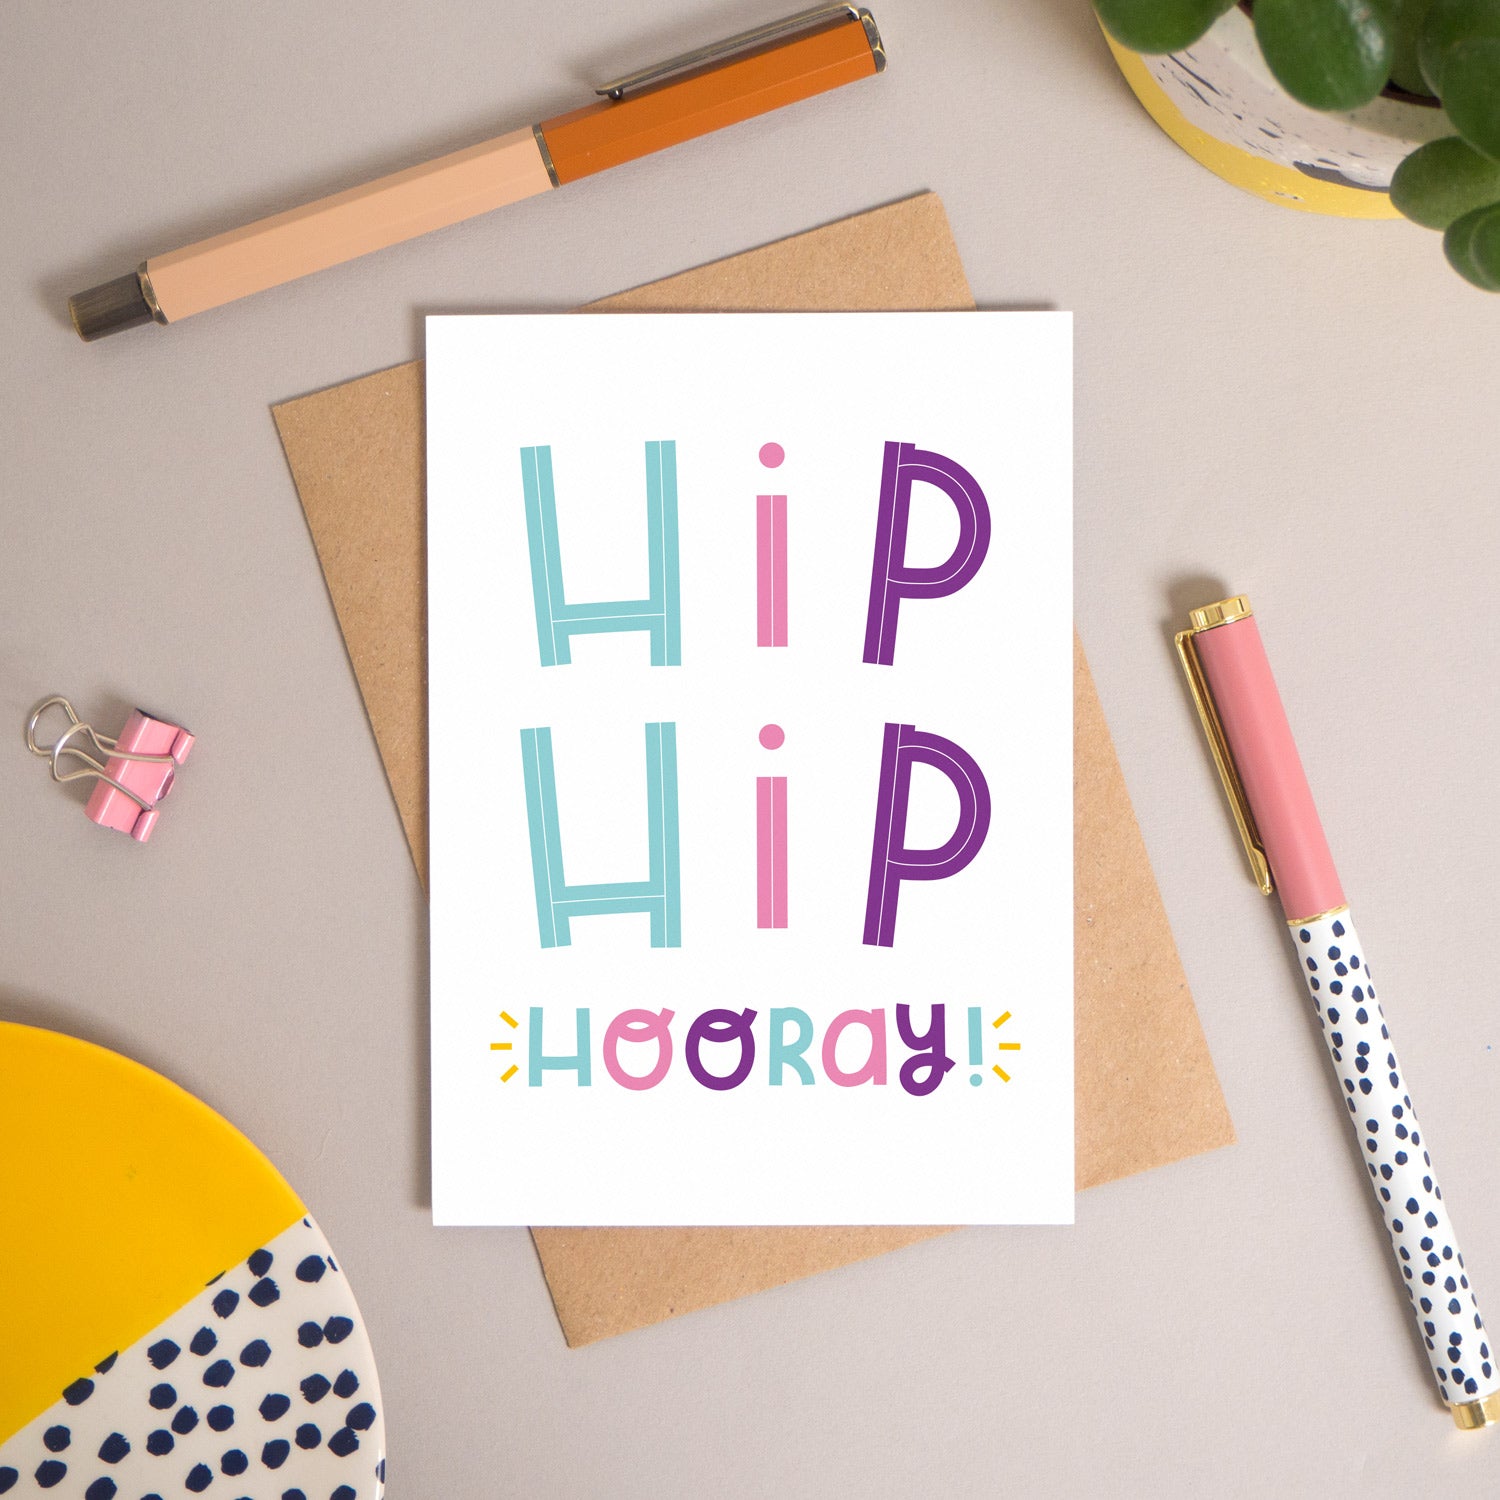 This ‘hip hip hooray!’ card has been shot flatlay style looking directly over the top of the card. It is lying flat on it’s kraft brown envelope, on a warm grey background. Surrounding the card are pens, a clip, a plant and a trinket dish. This version of the card is in varying tones of pink, purple and  blue.